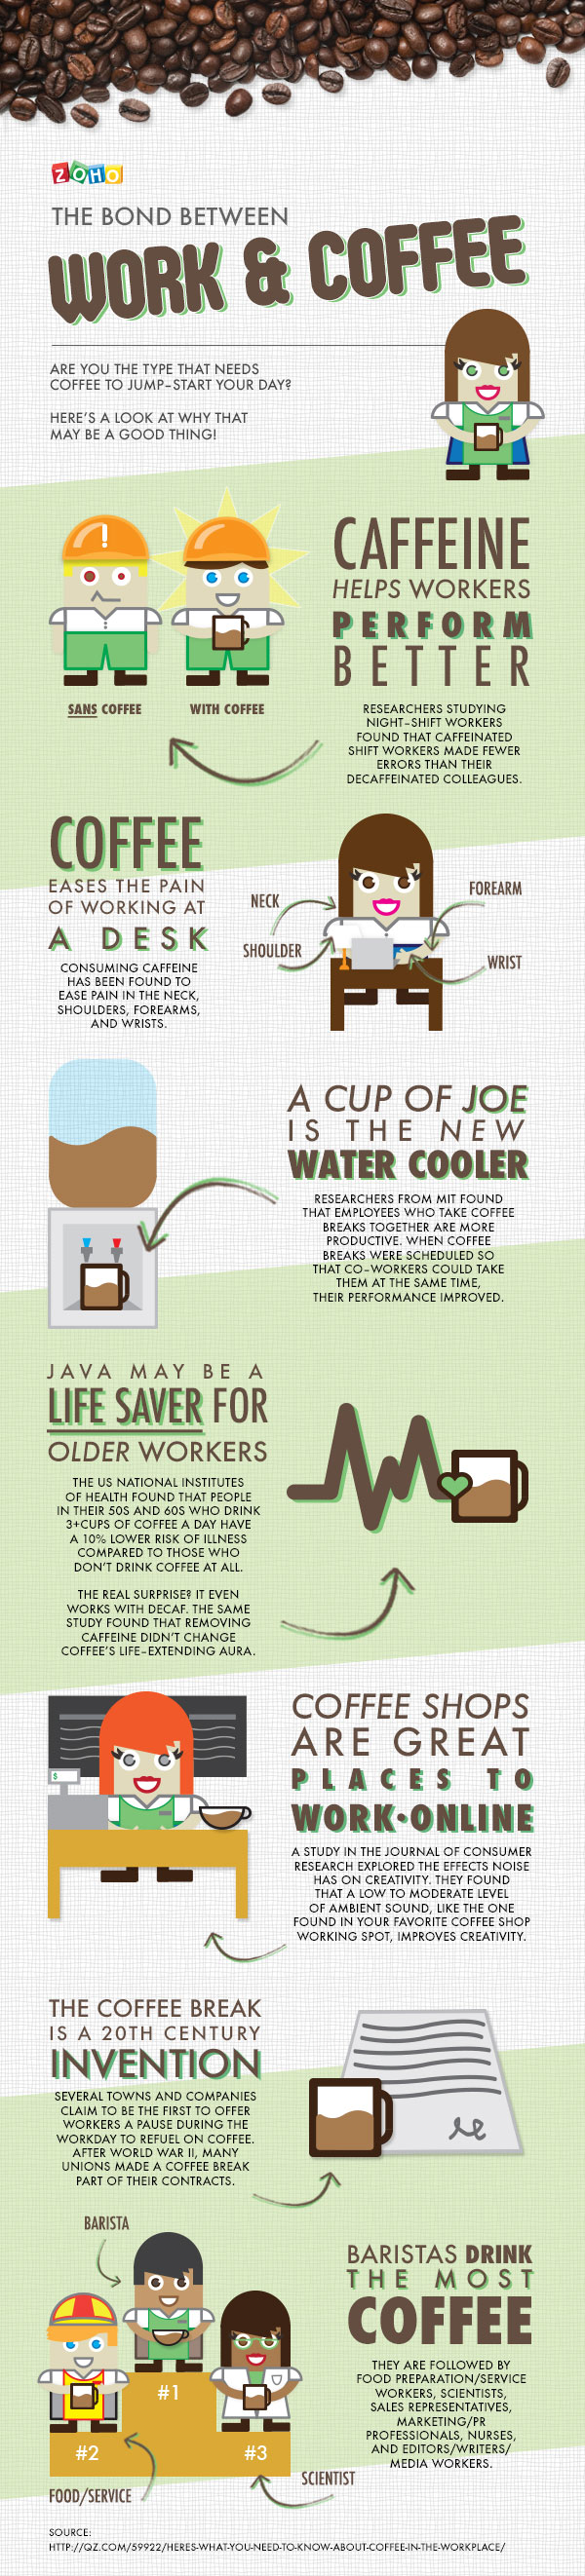 benefits-of-drinking-coffee